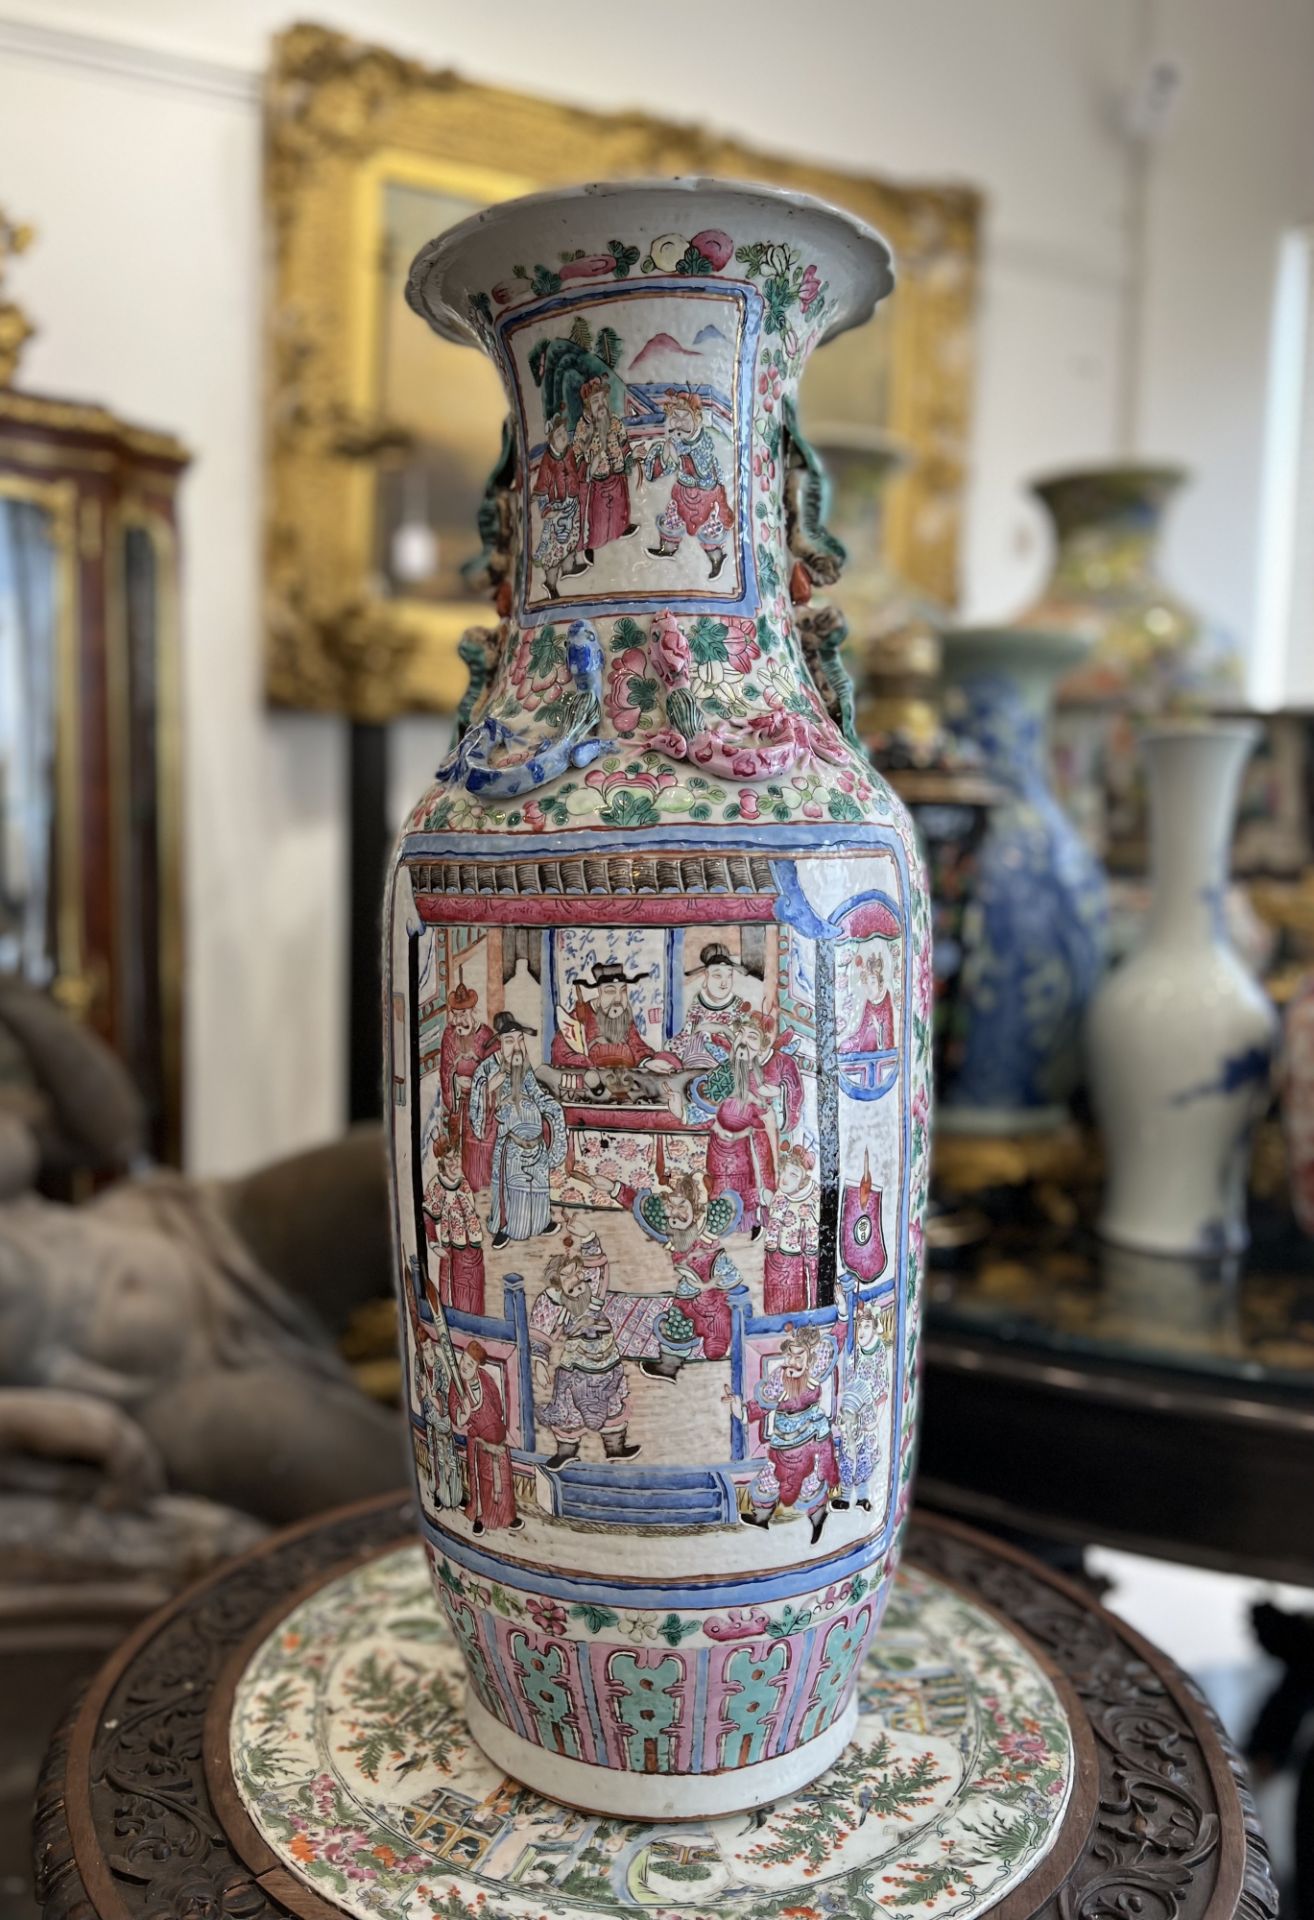 A LARGE LATE 19TH CENTURY CHINESE FAMILLE ROSE PORCELAIN VASE - Image 2 of 6